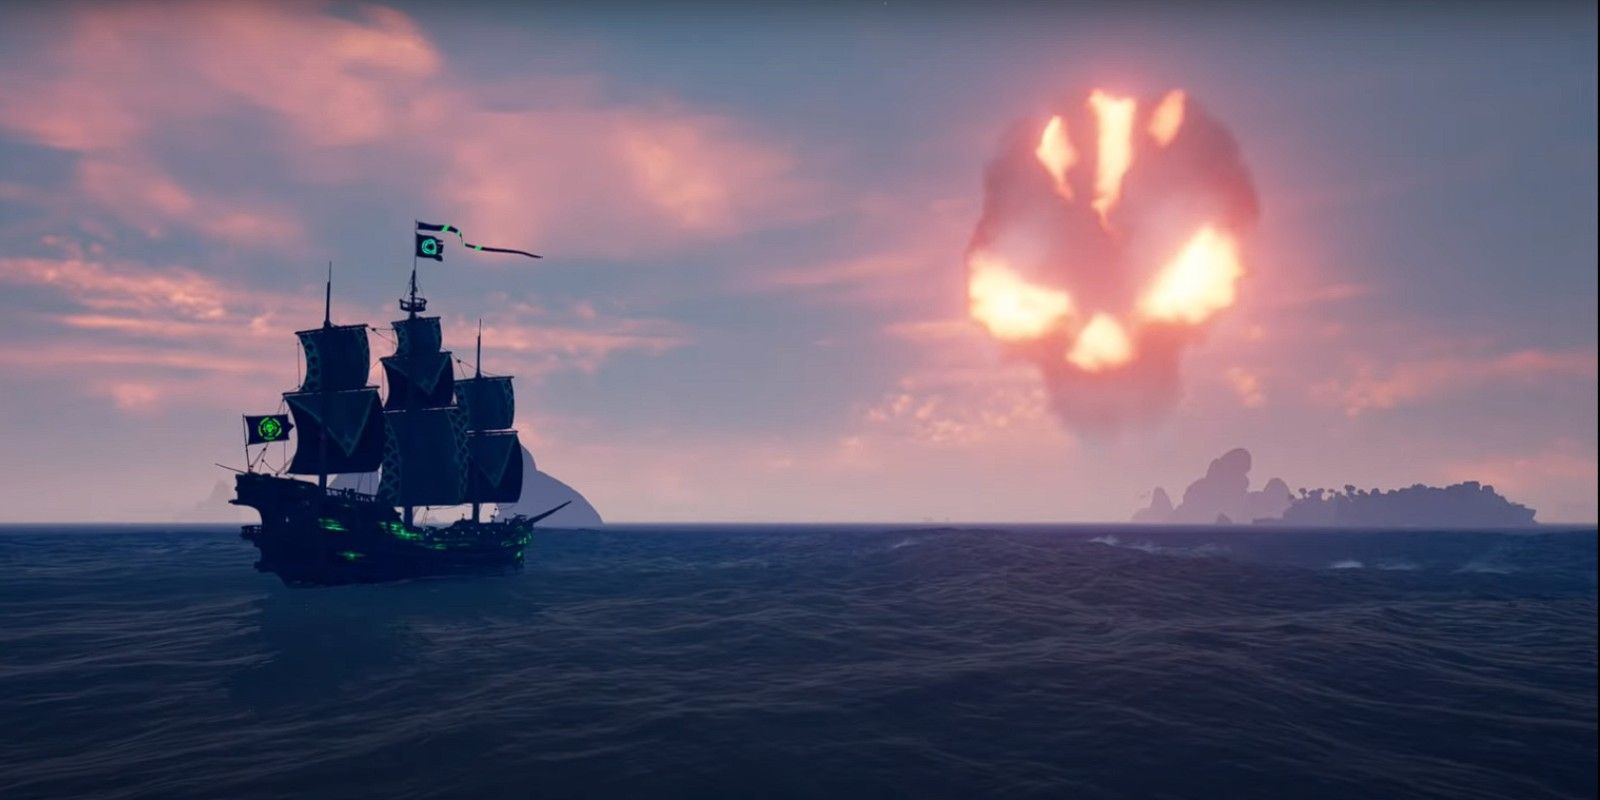 The Fort of Fortune rare world event marker for Sea of Thieves